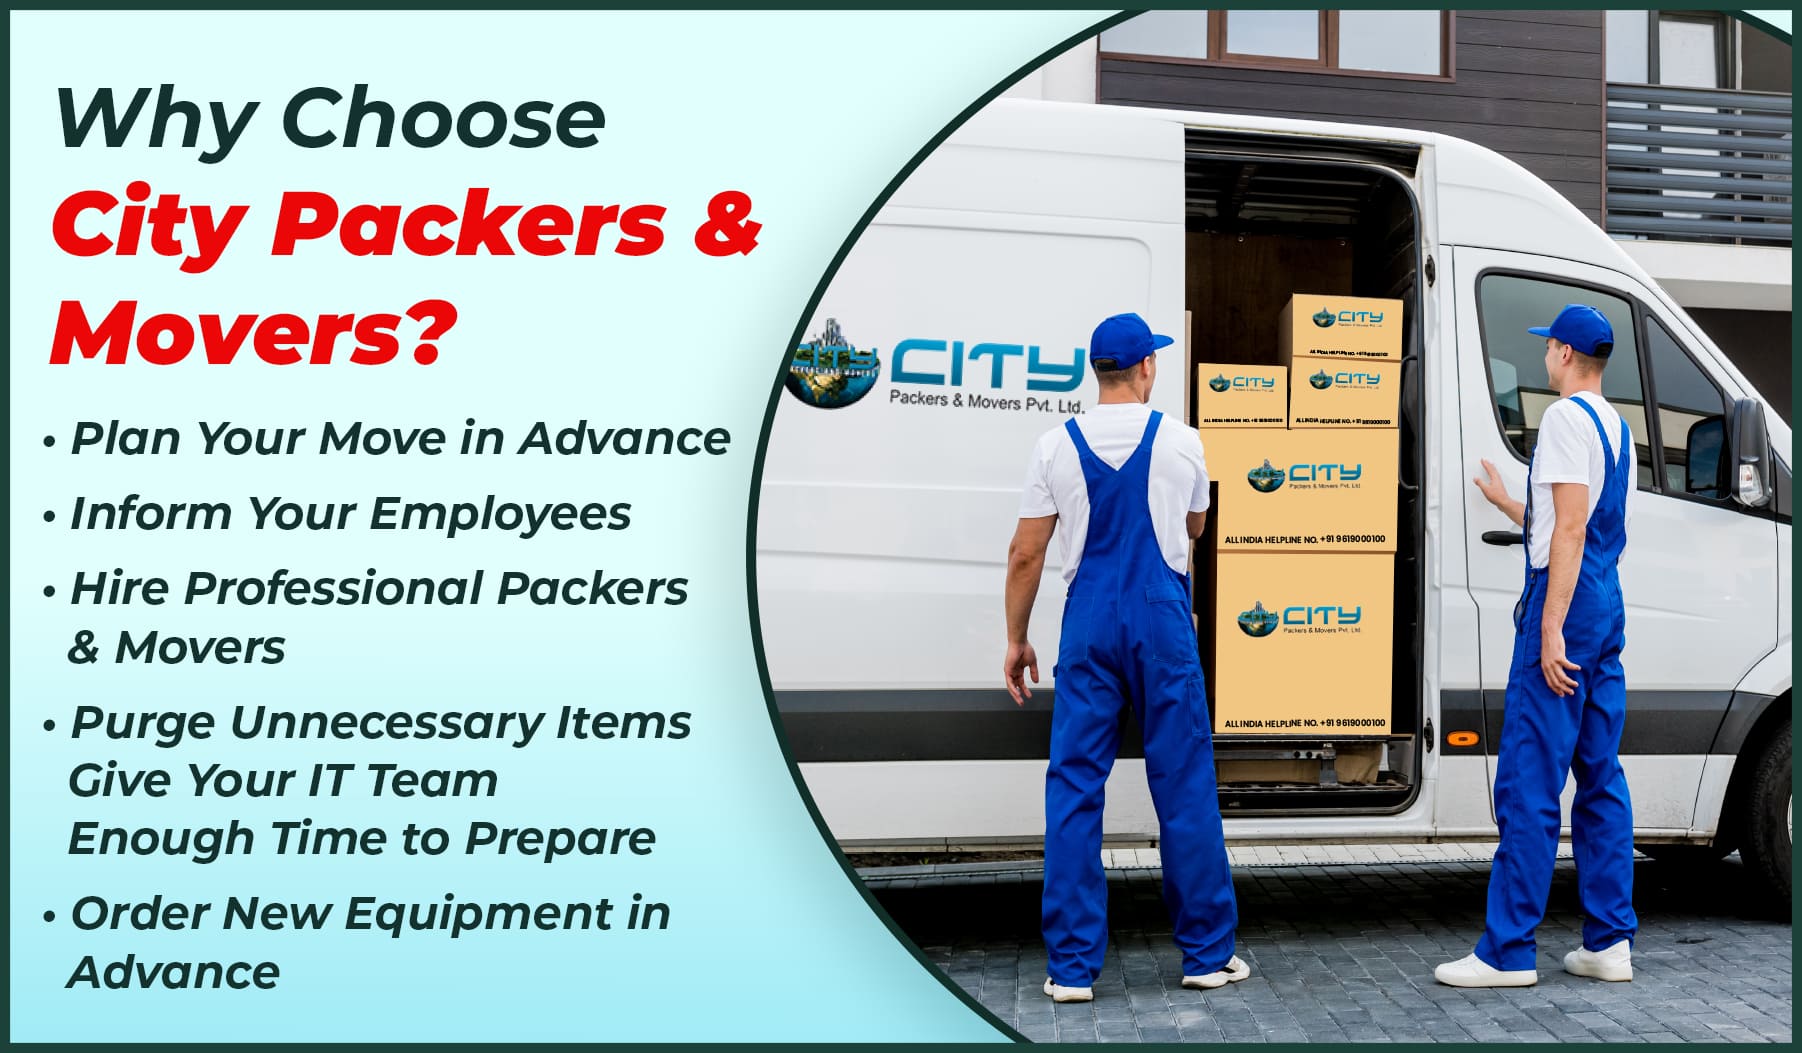 Why Choose City Packers & Movers?